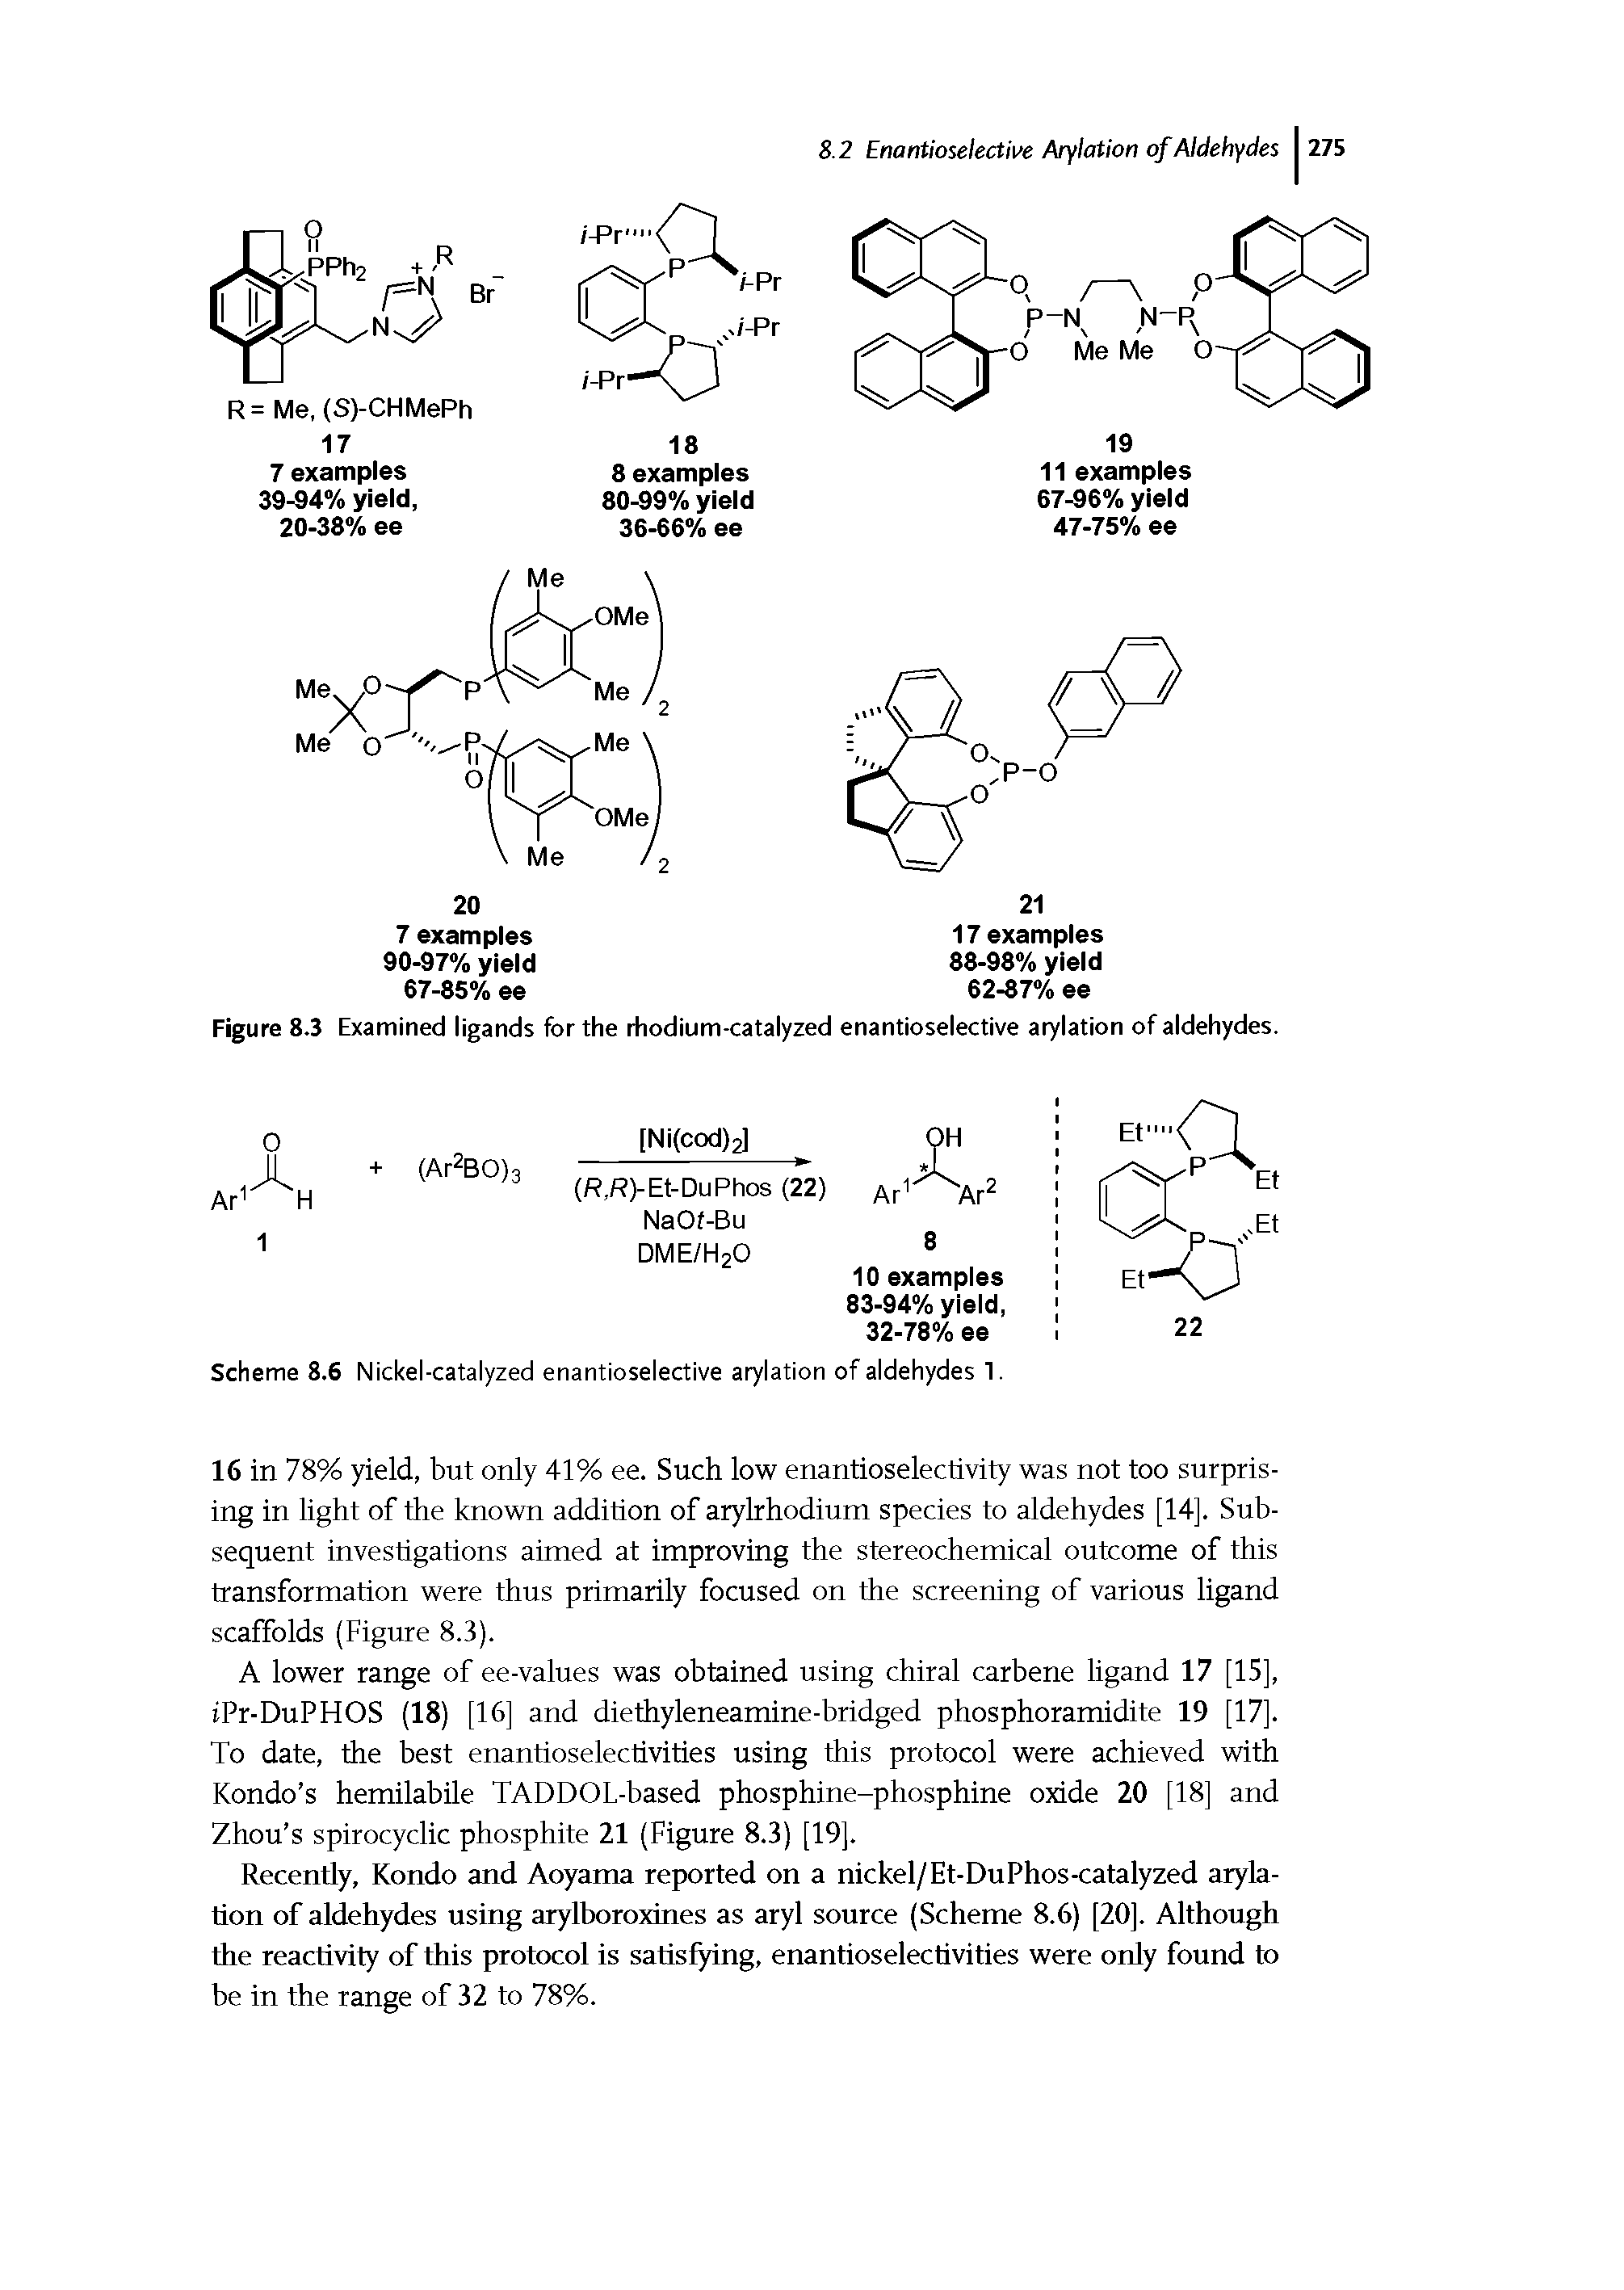 Figure 8.3 Examined ligands for the rhodium-catalyzed enantioselective arylation of aldehydes.